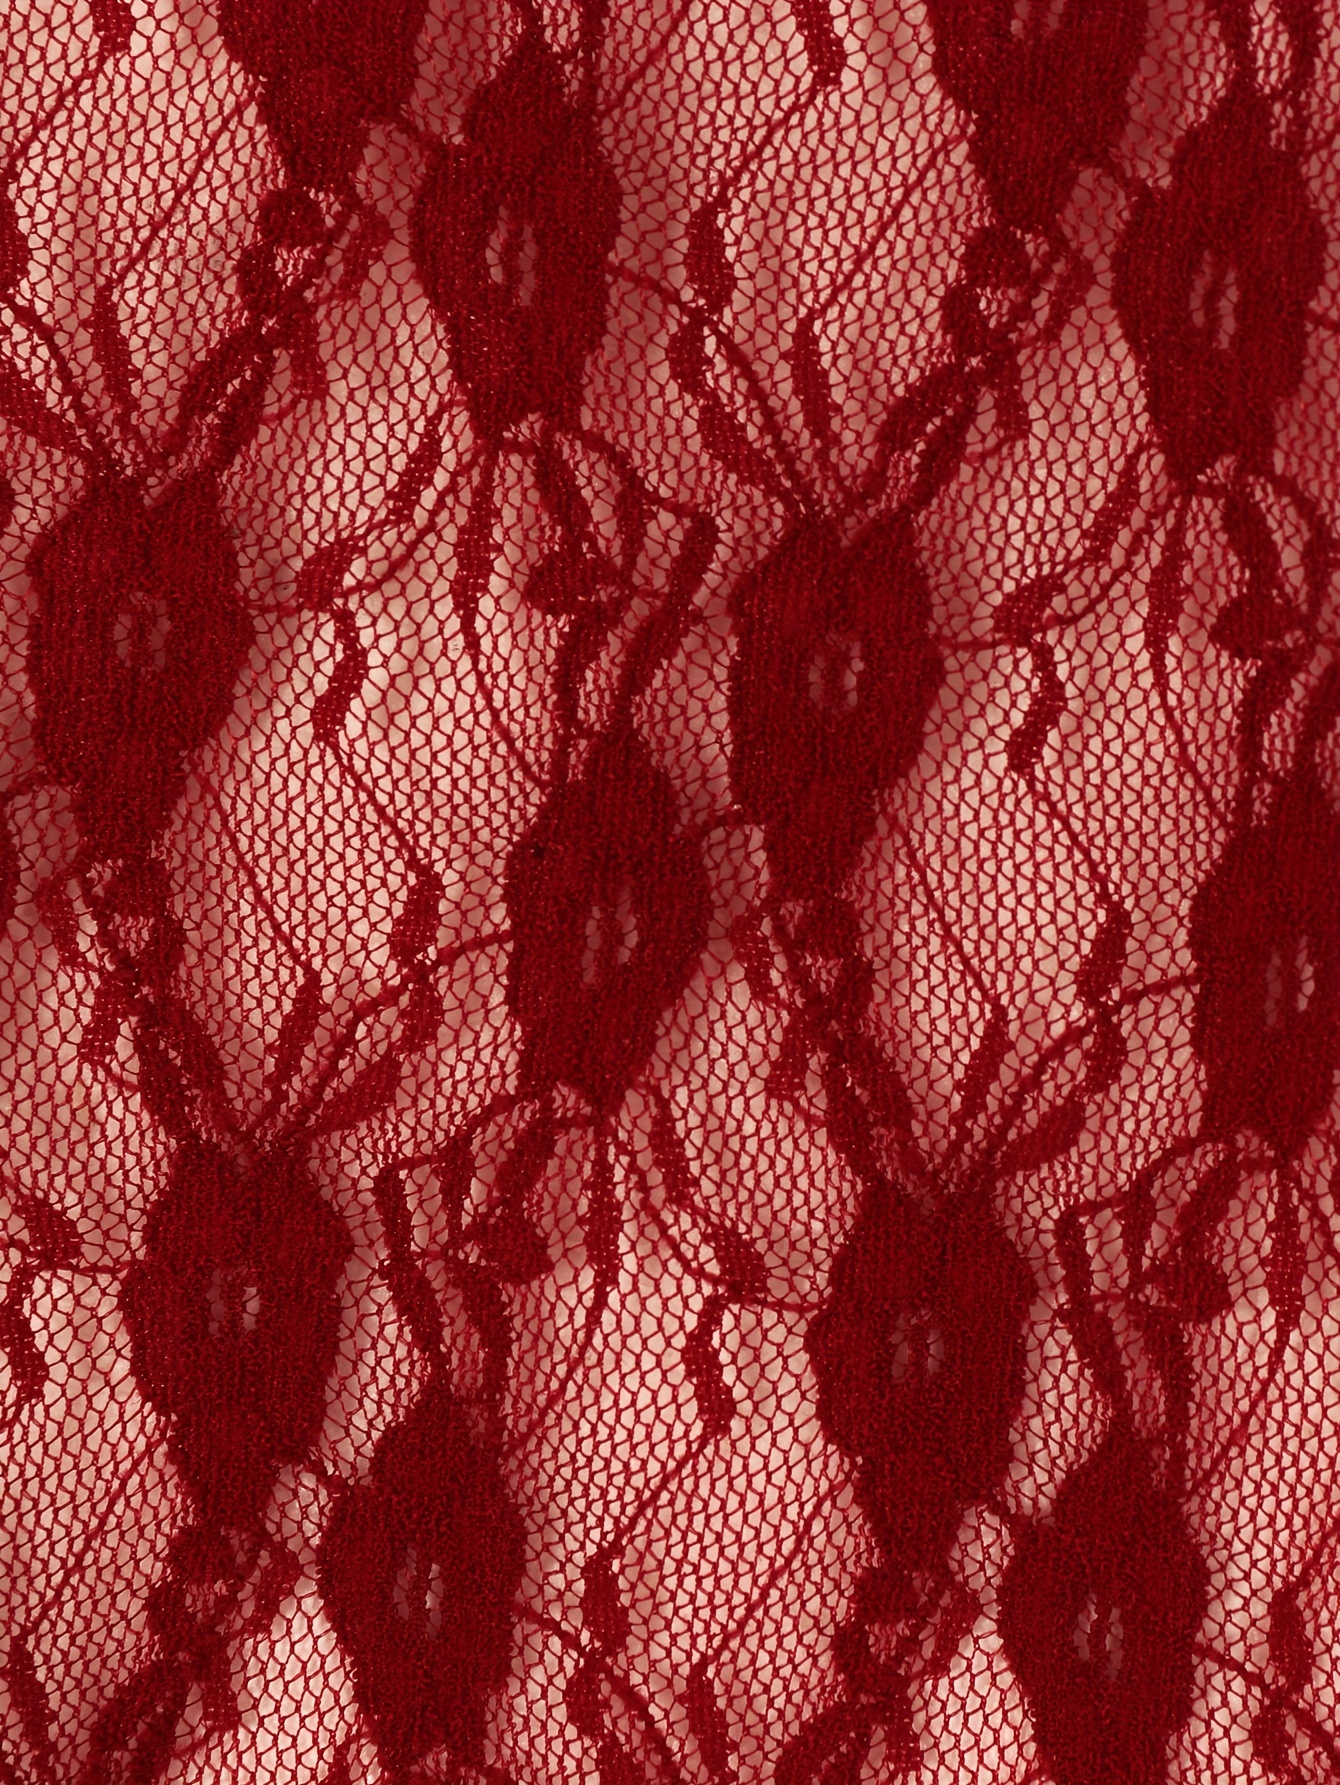 Stretch Lace Fabric Red